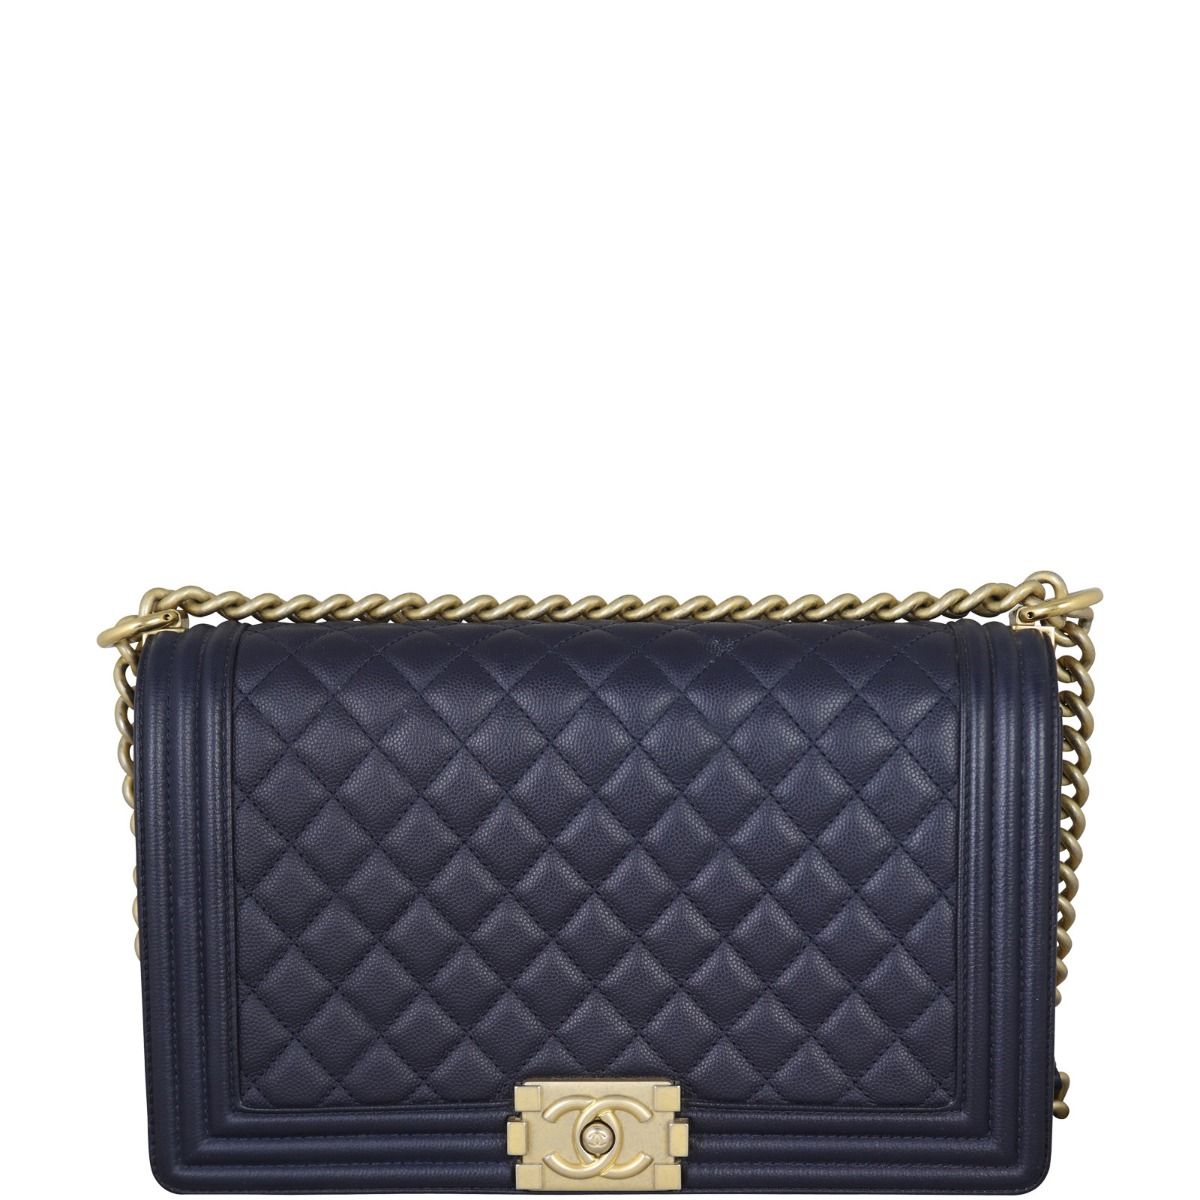 Chanel Velvet Small Le Boy Bag Navy Blue RHW  DESIGNER TAKEAWAY BY QUEEN  OF LUXURY BOUTIQUE INC